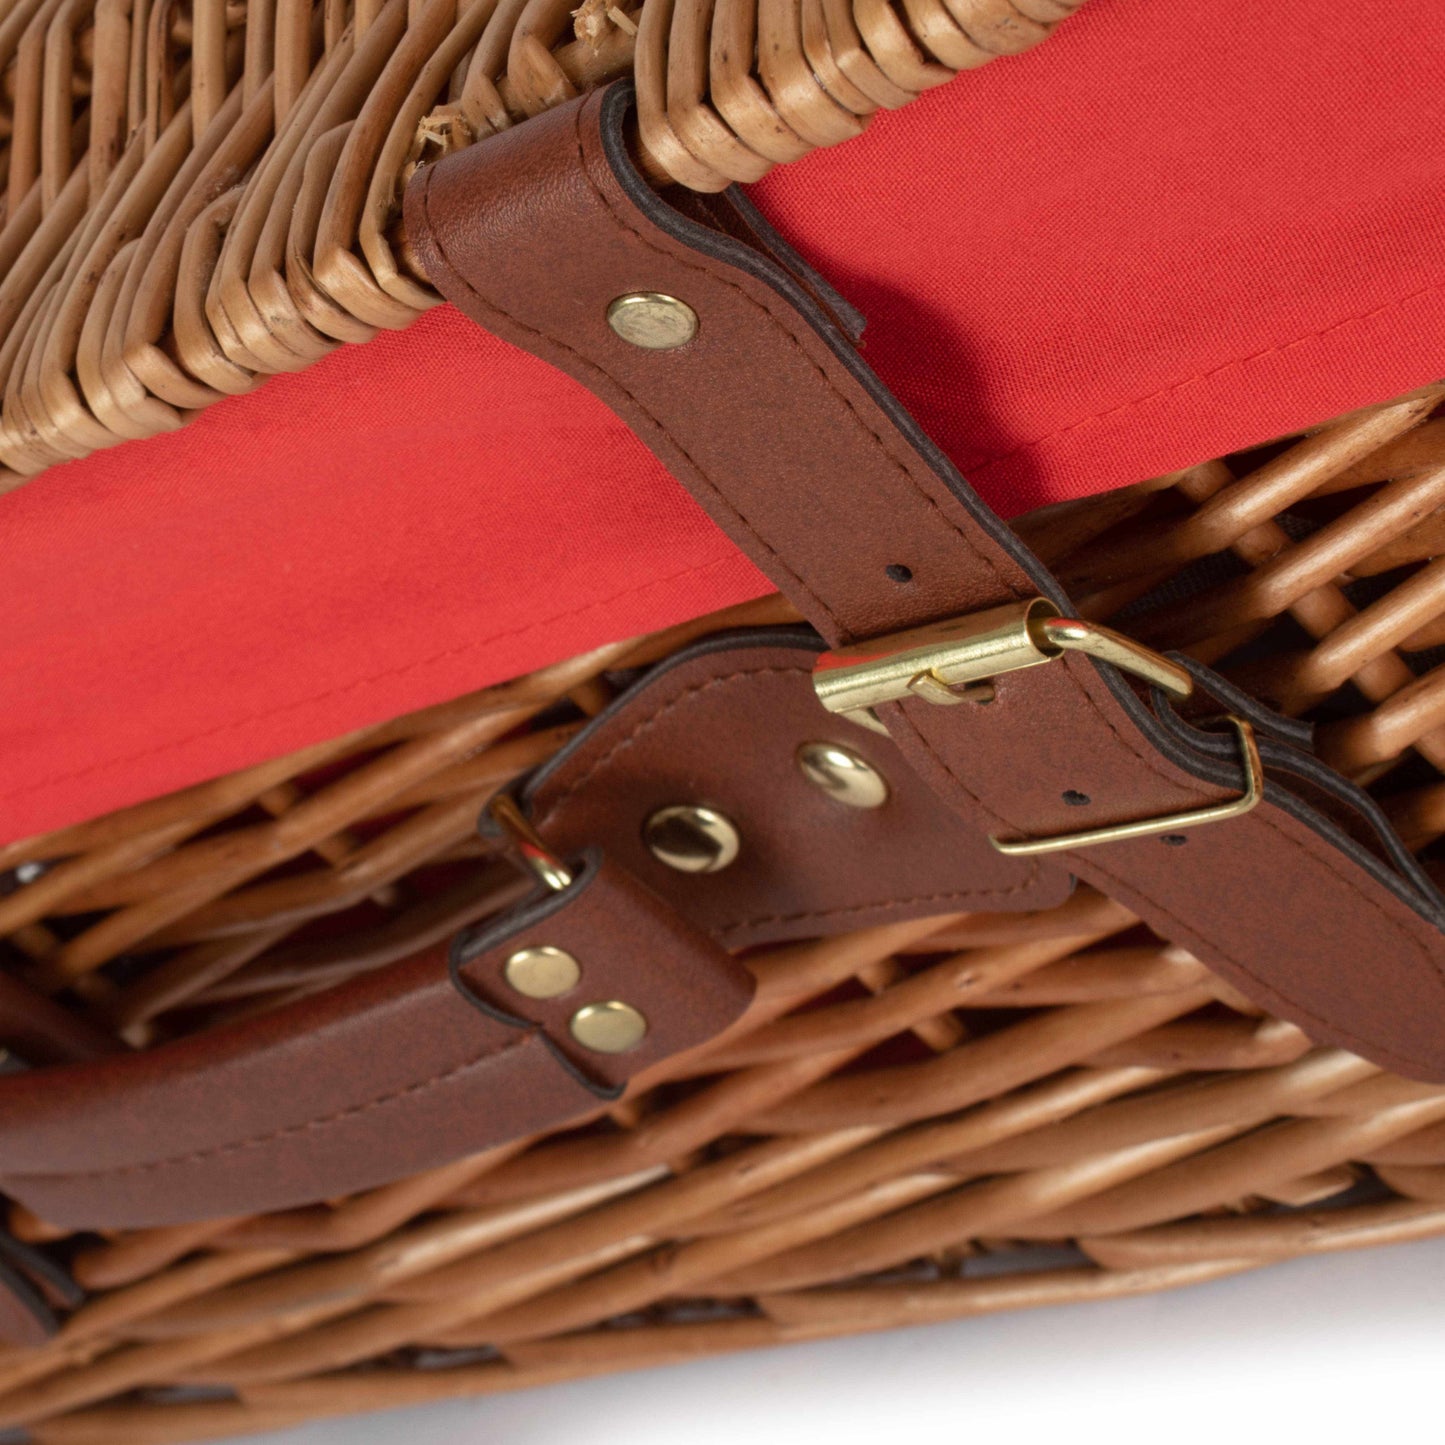 16 Inch Light Steamed Hamper With Red Lining